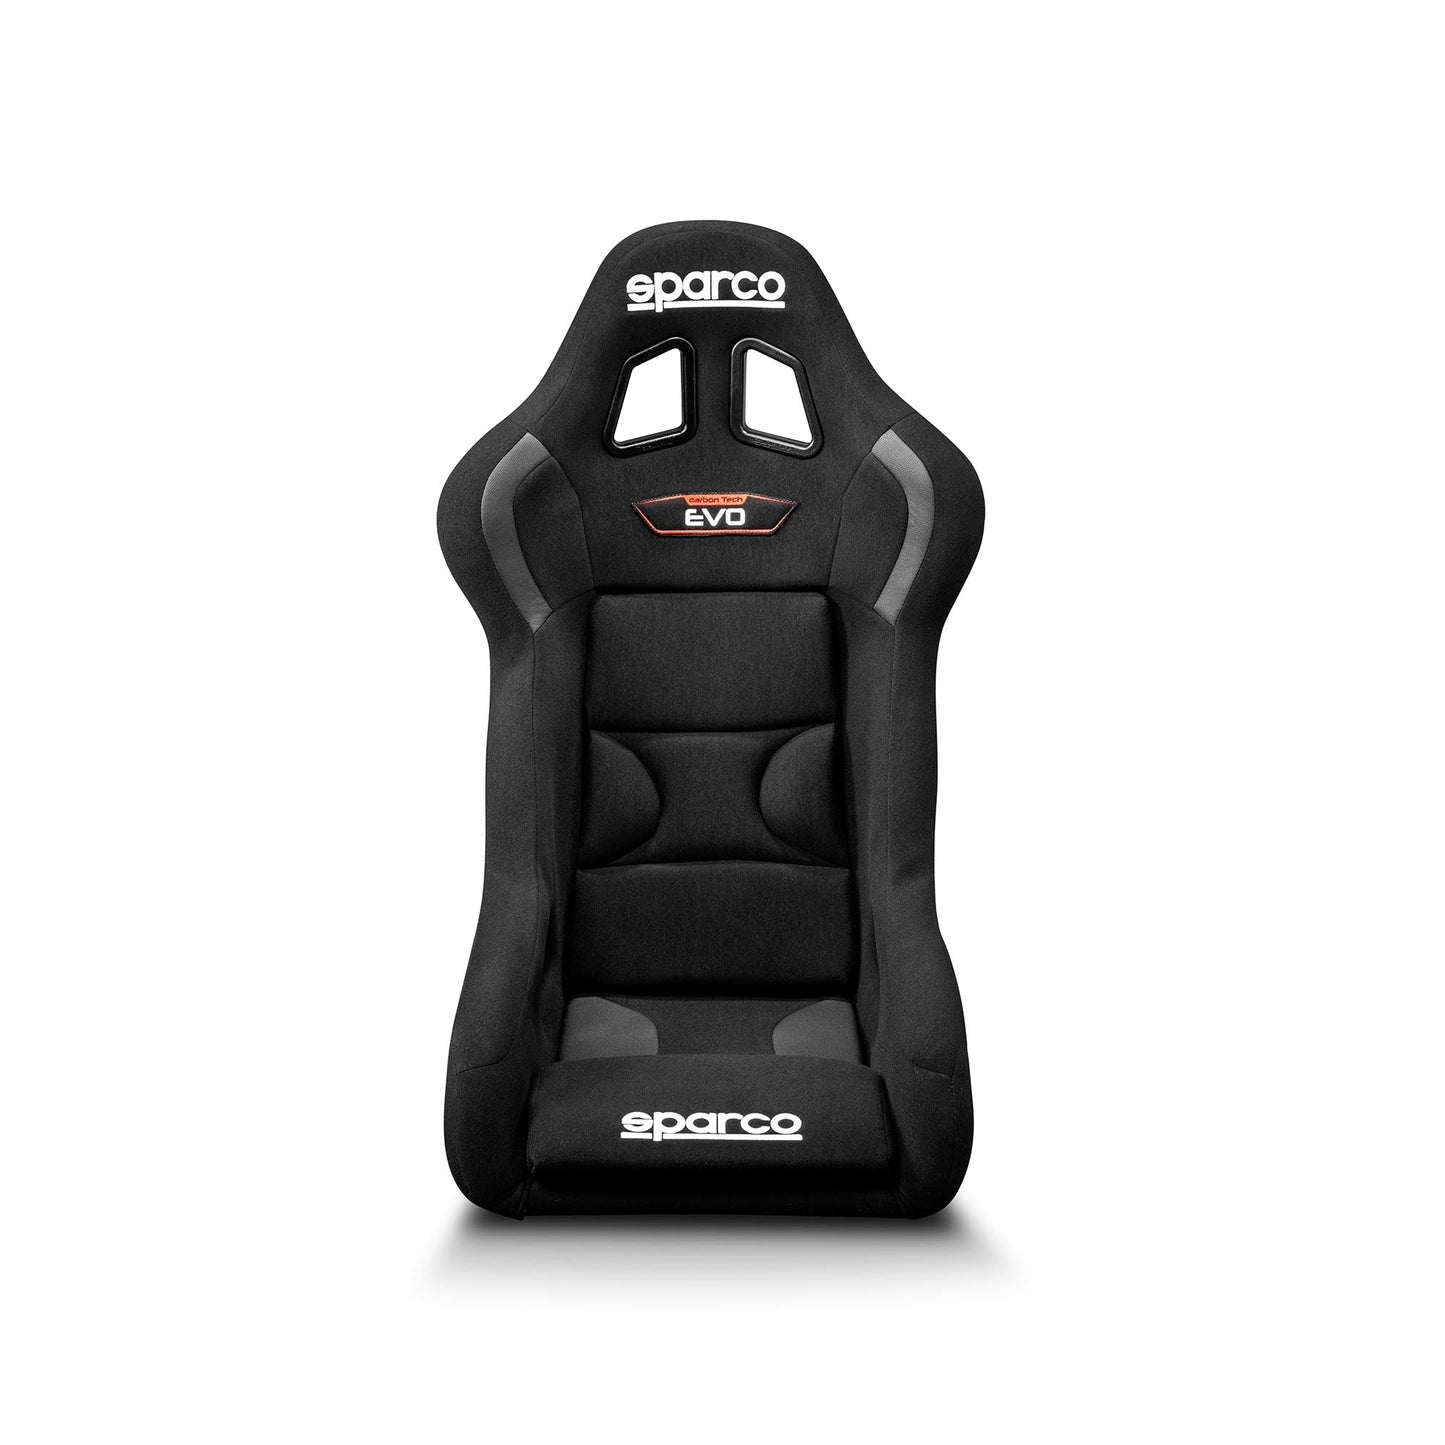 Sparco Evo Carbon Racing Seat